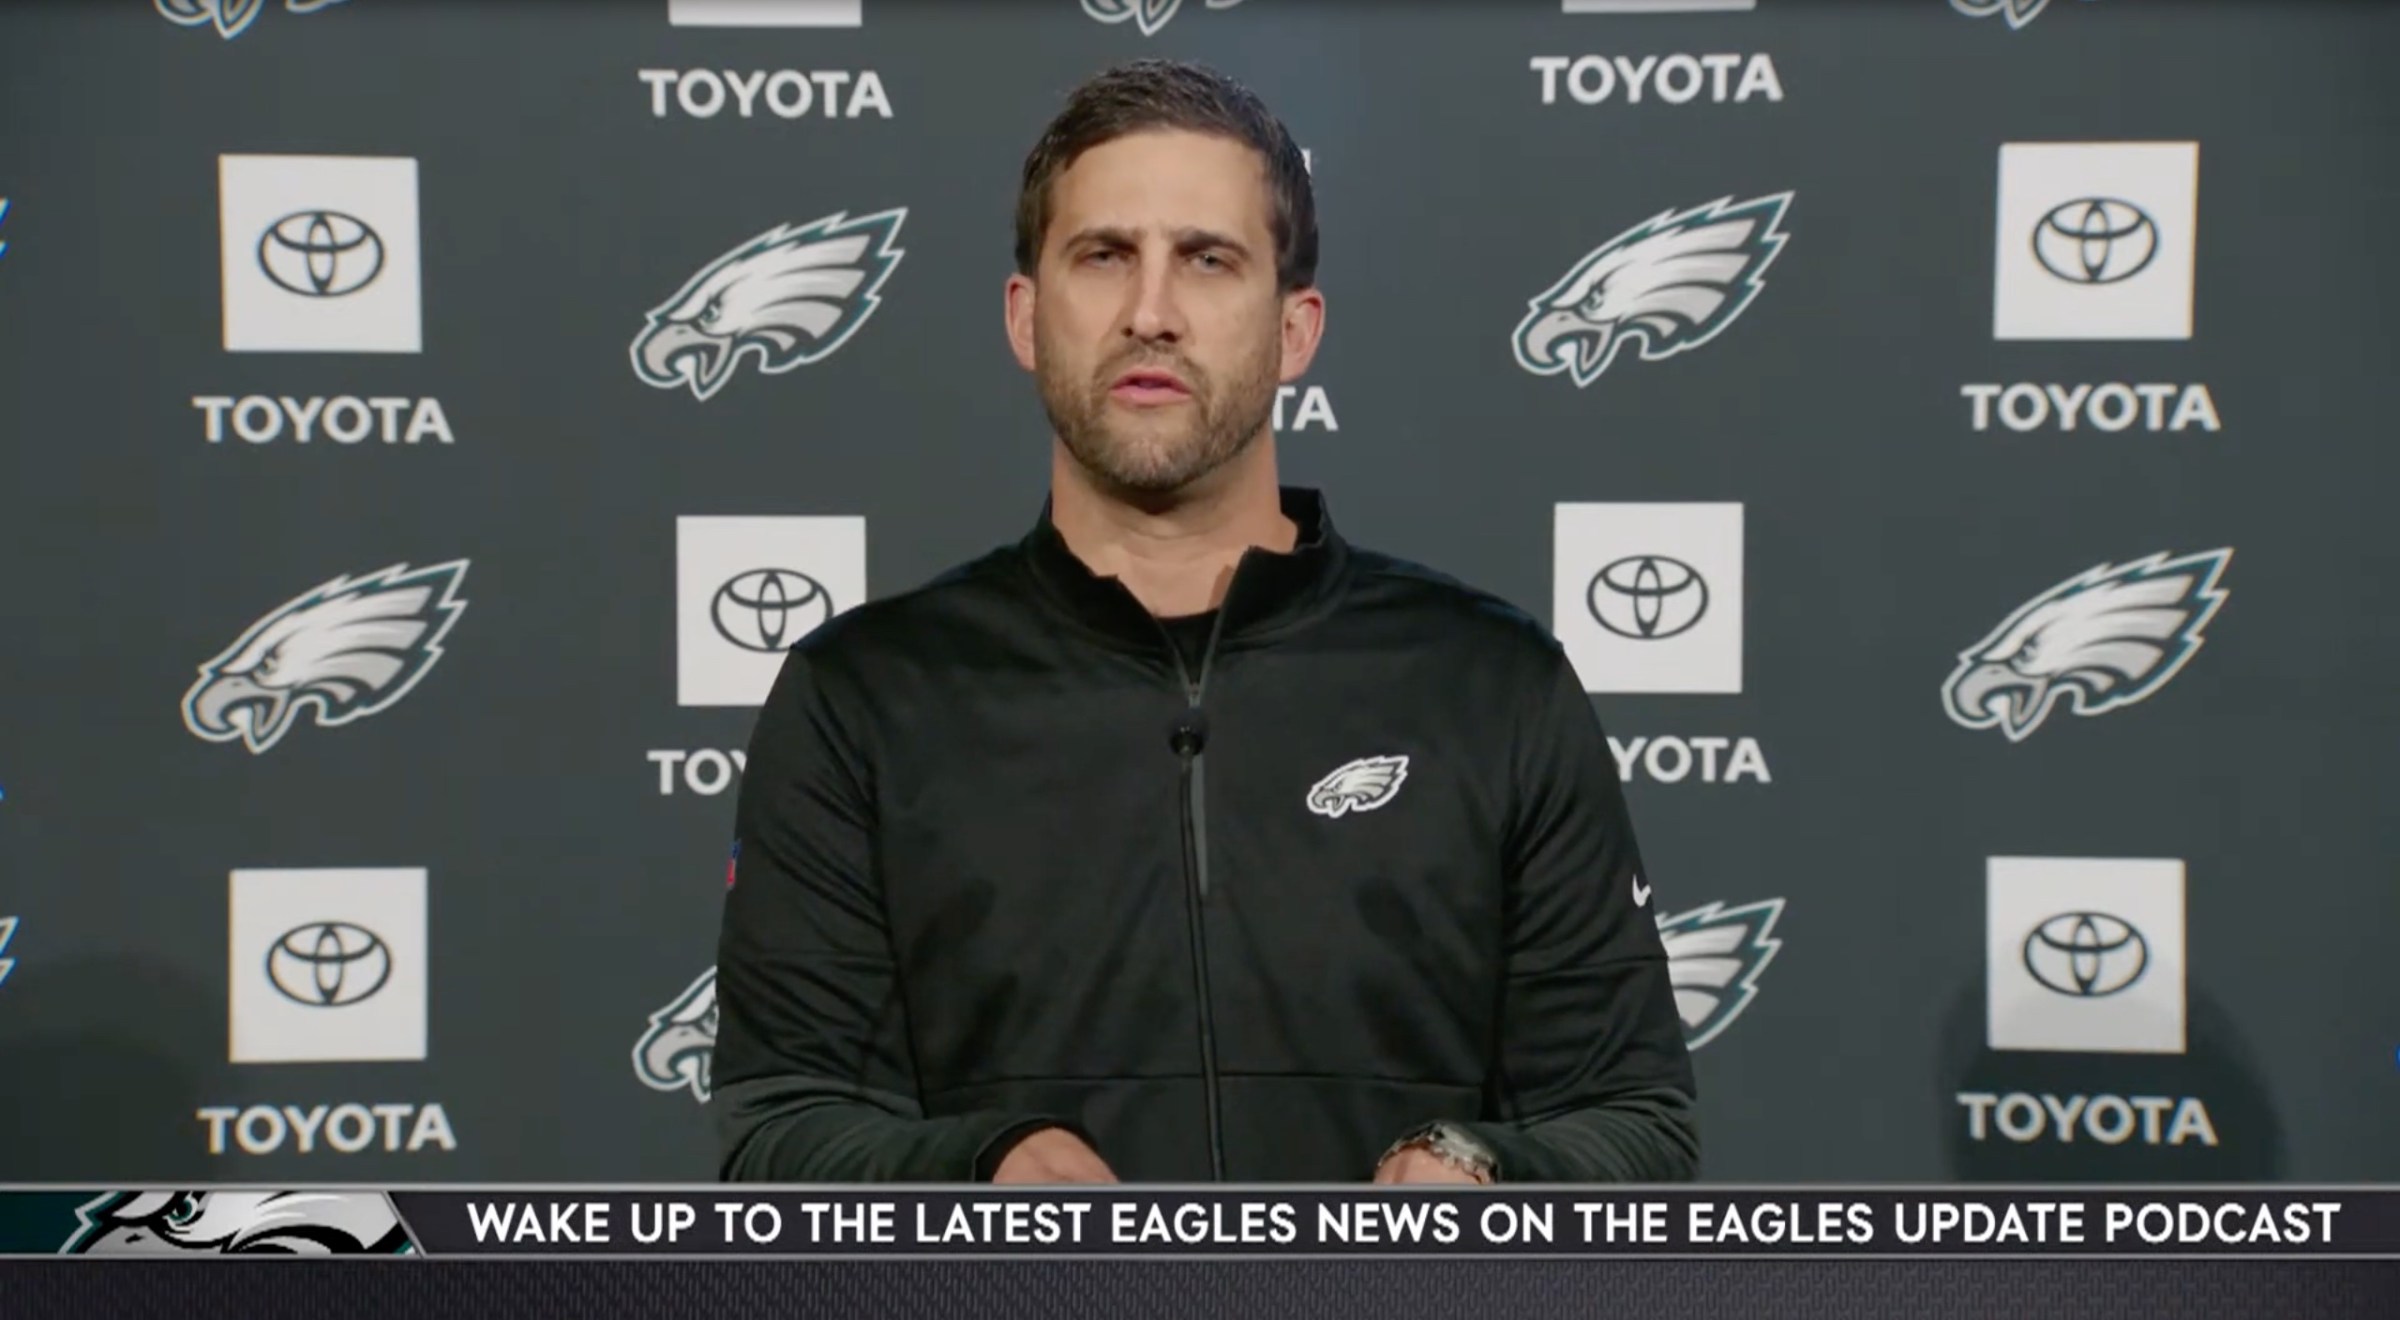 Philadelphia Eagles head coach Nick Sirianni in his introductory press conference